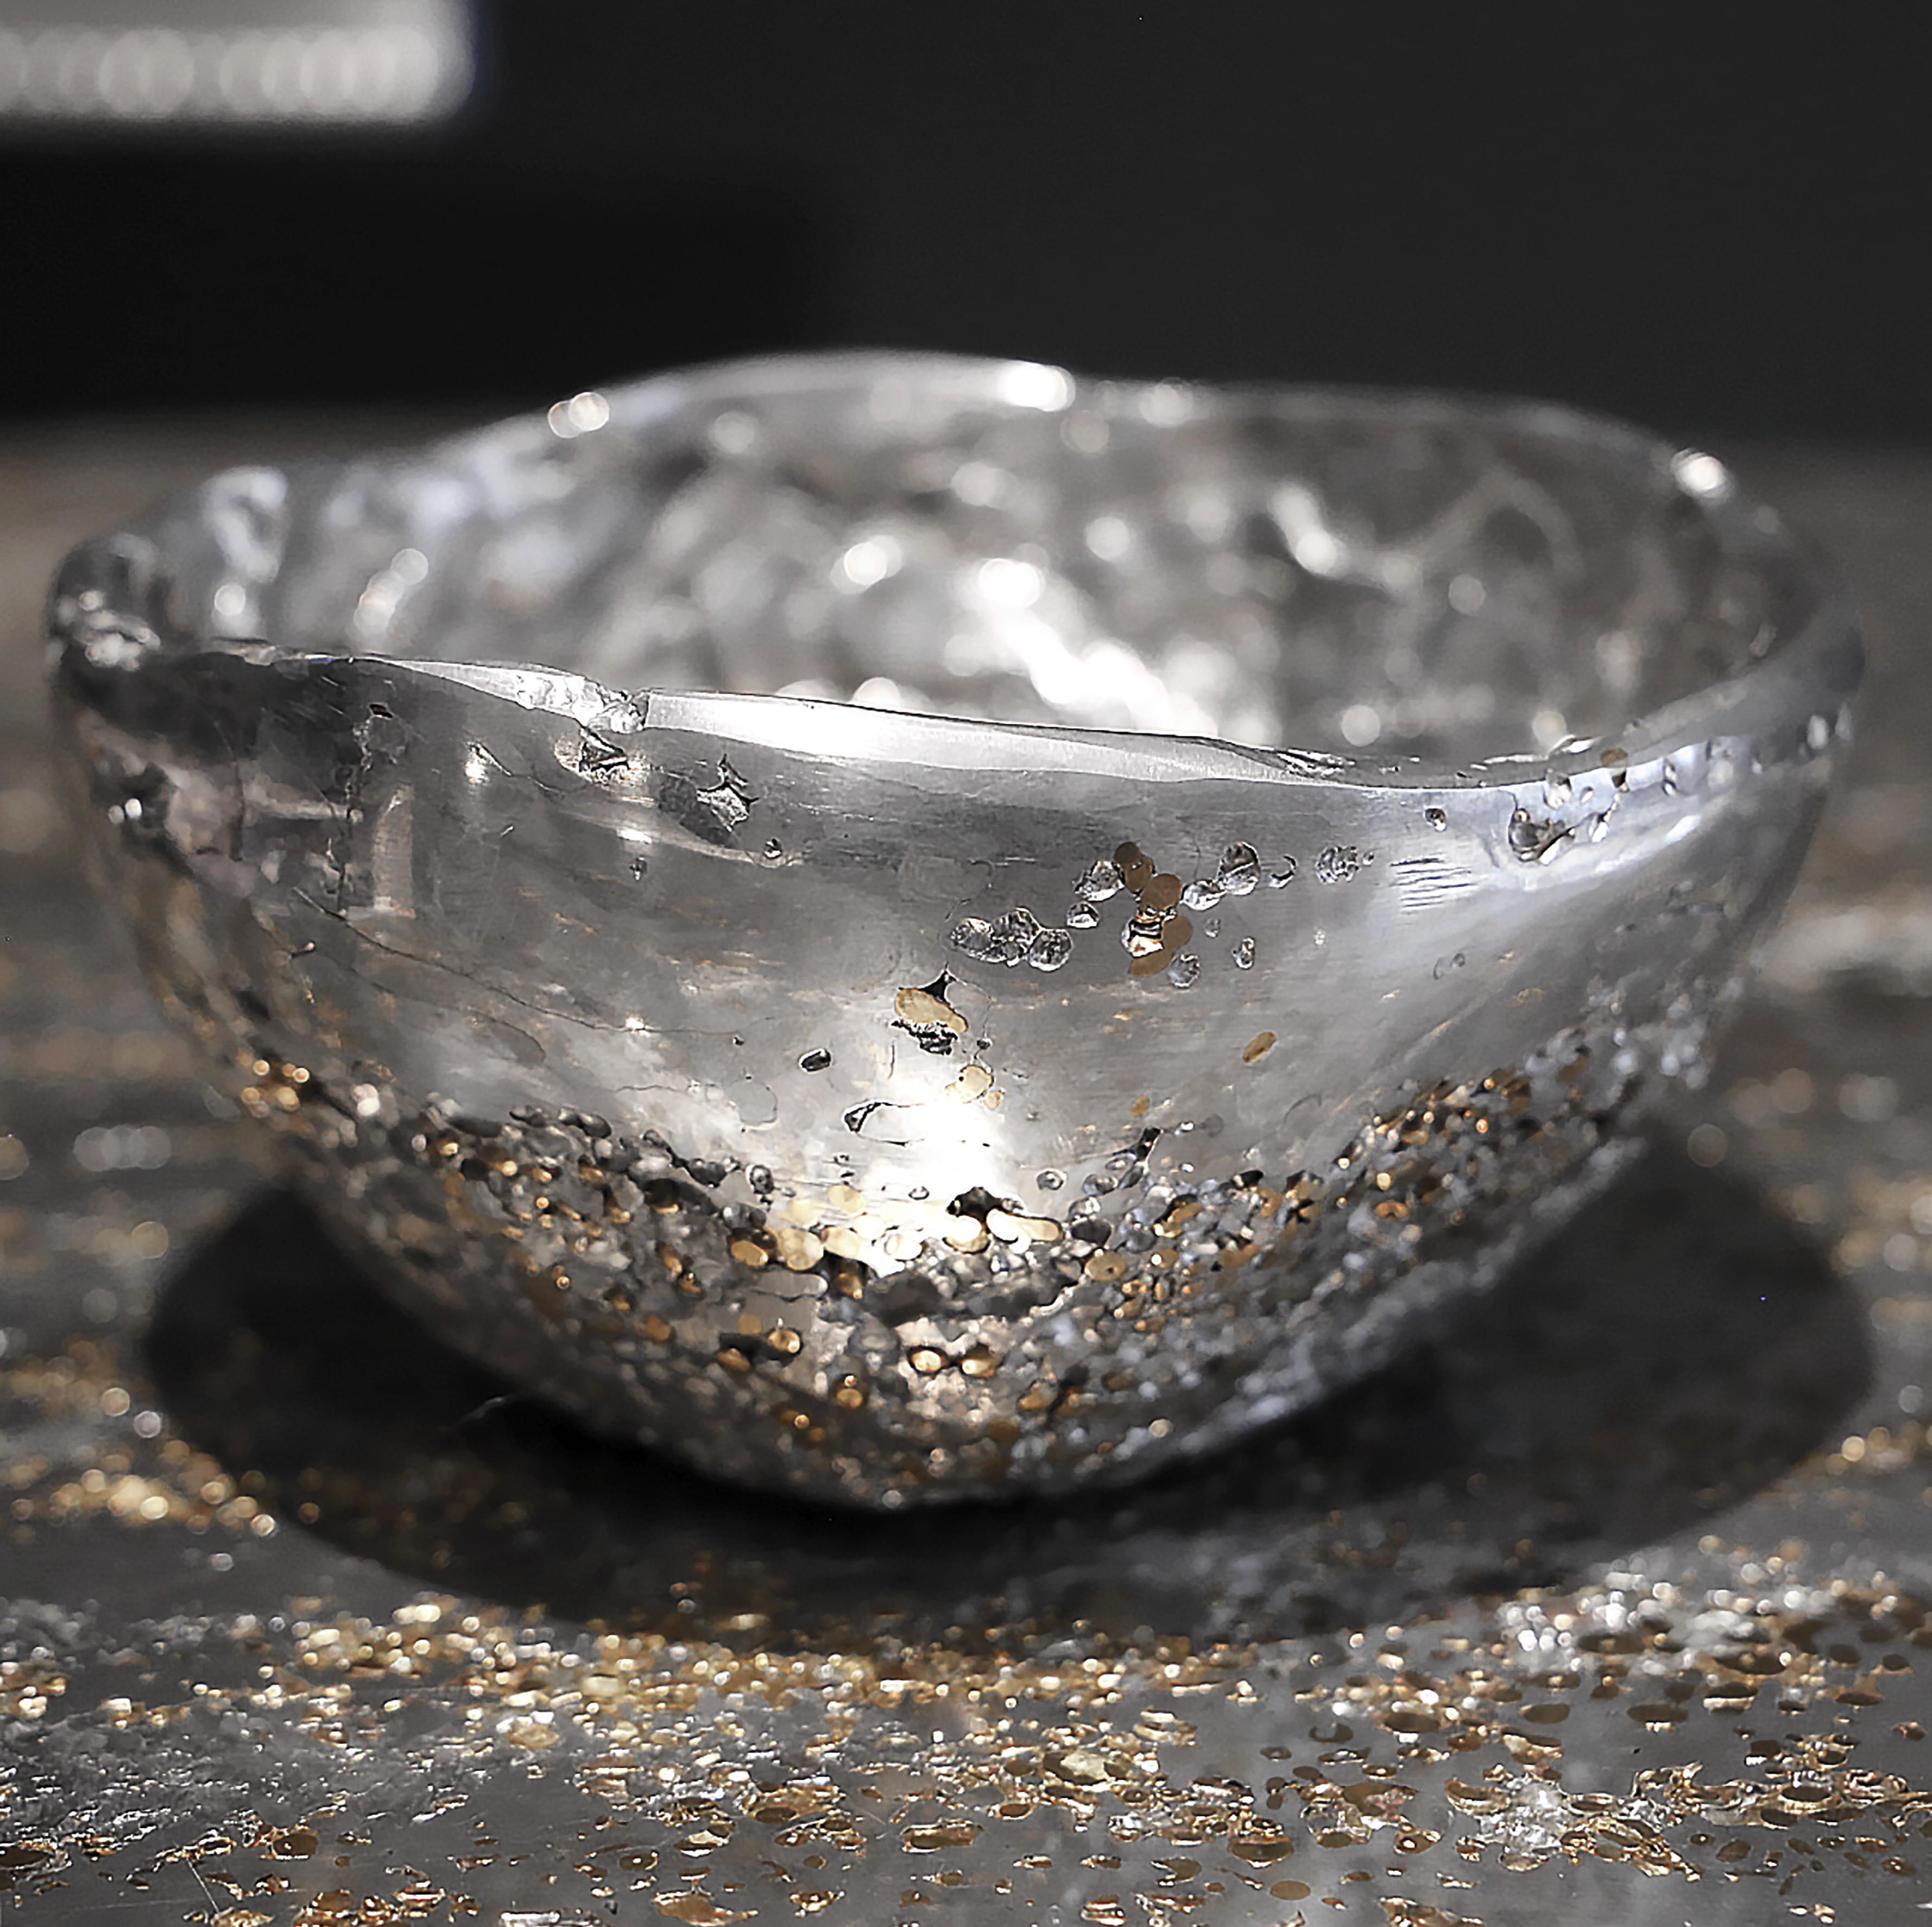 In stock. This contemporary cup is a unique piece, created by Xavier Lavergne and made of melted pewter with brass grains. It seems like a Meteorite discovered in the sand. Handmade in France and sold with its “Certificate of Authenticity”, this